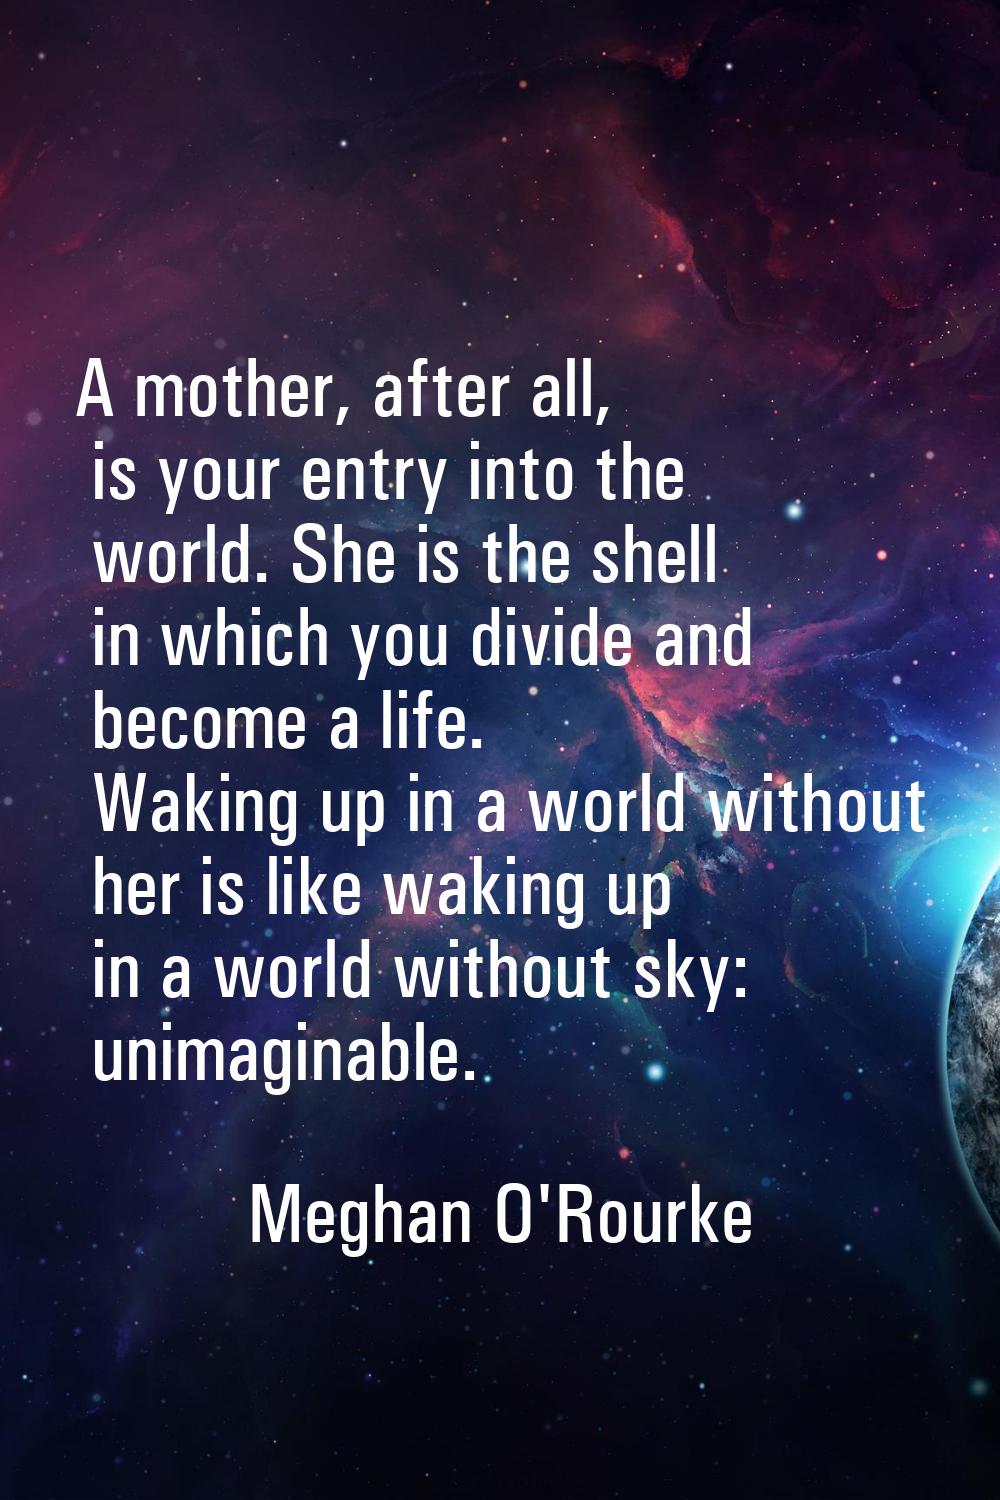 A mother, after all, is your entry into the world. She is the shell in which you divide and become 